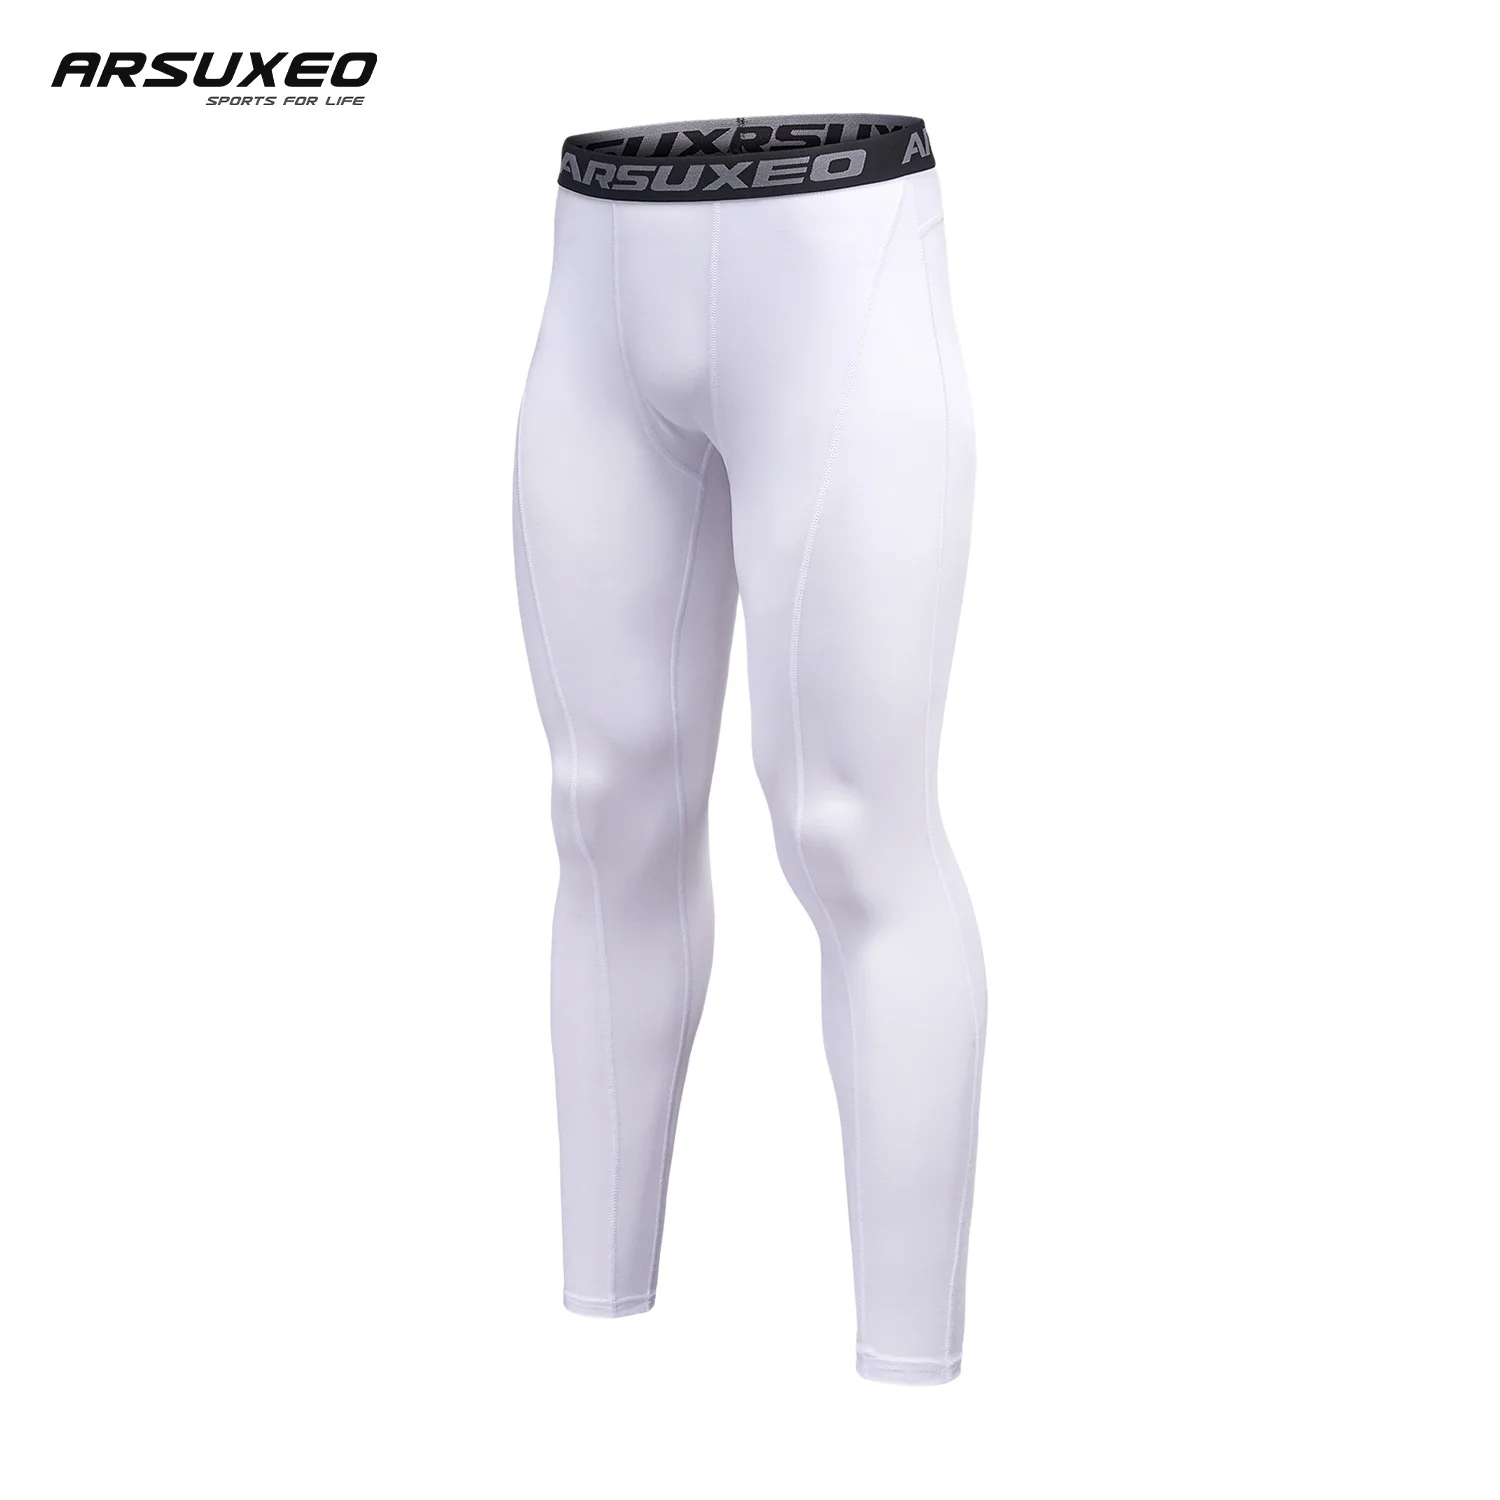 

ARSUXEO Running Compression Tights Pants Men Quick Dry Fitness Jogging Sport Leggings Bodybuilding Gym Workout Training Trouser